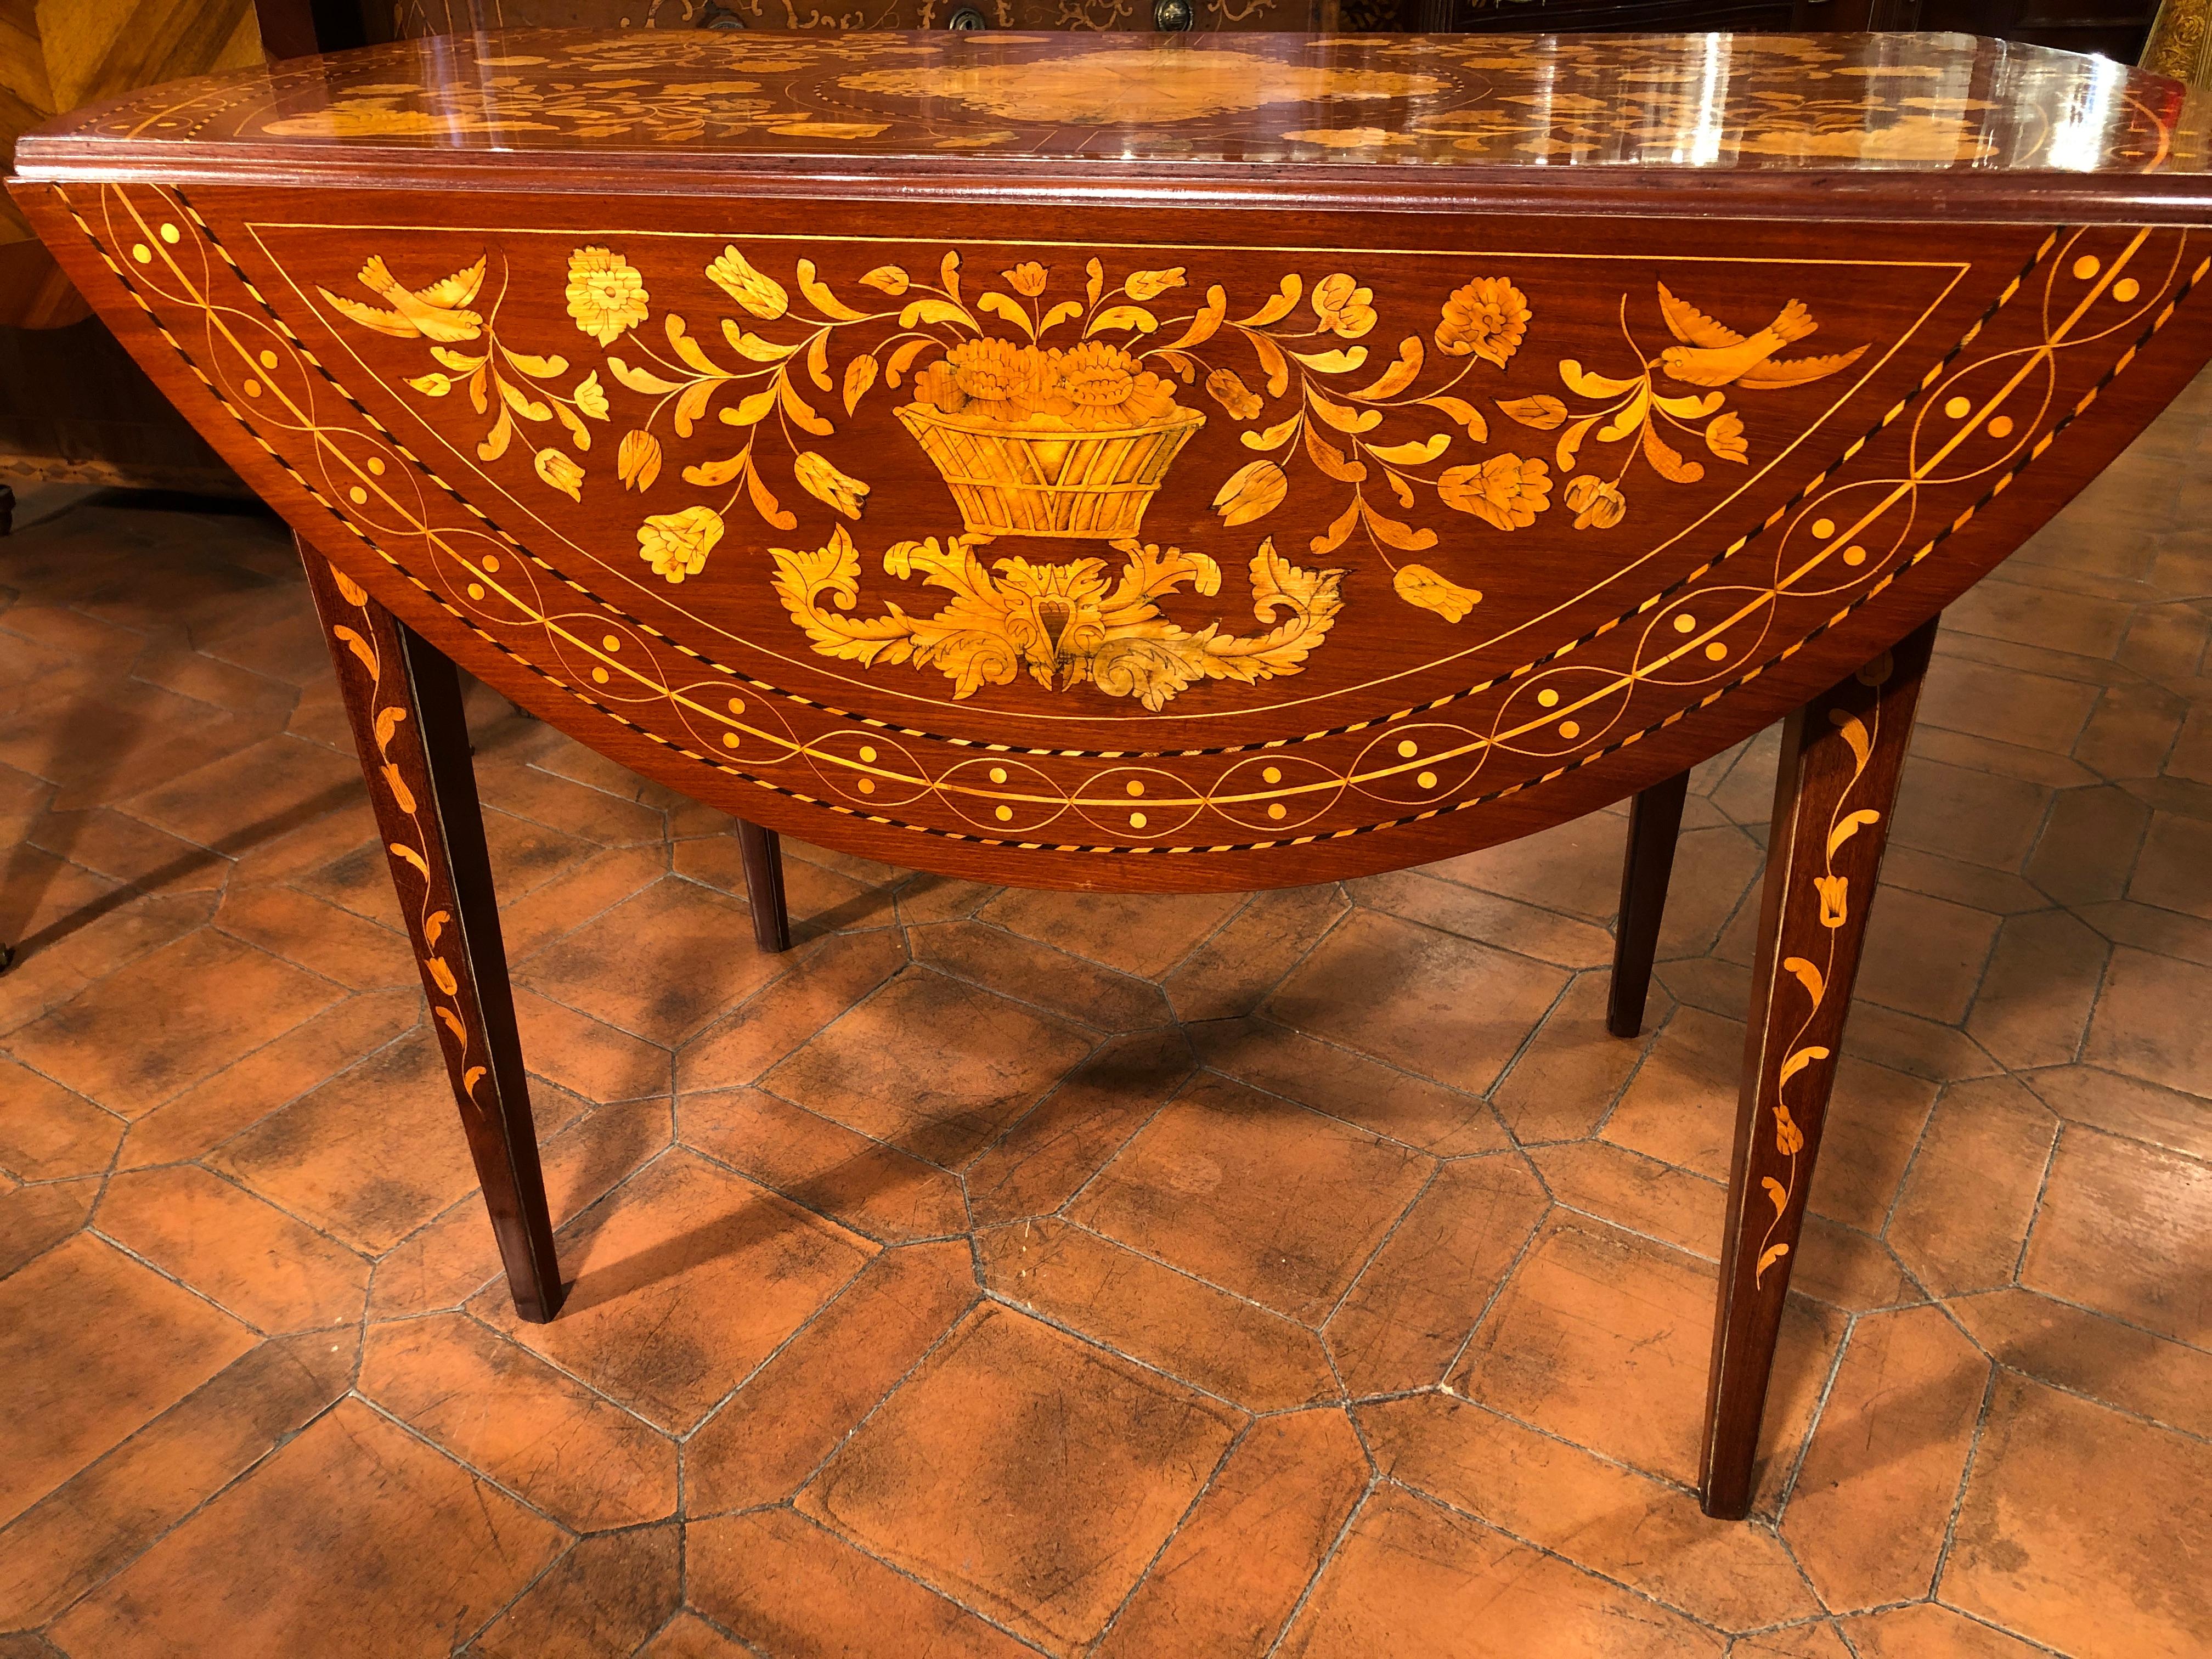 Sofa table from the Netherlands, in full Dutch style in tarsia, famous throughout Europe. It is thought that the Holland produced furniture of different shapes and inlays according to the country that ordered the furniture.
This Sofa Table was for